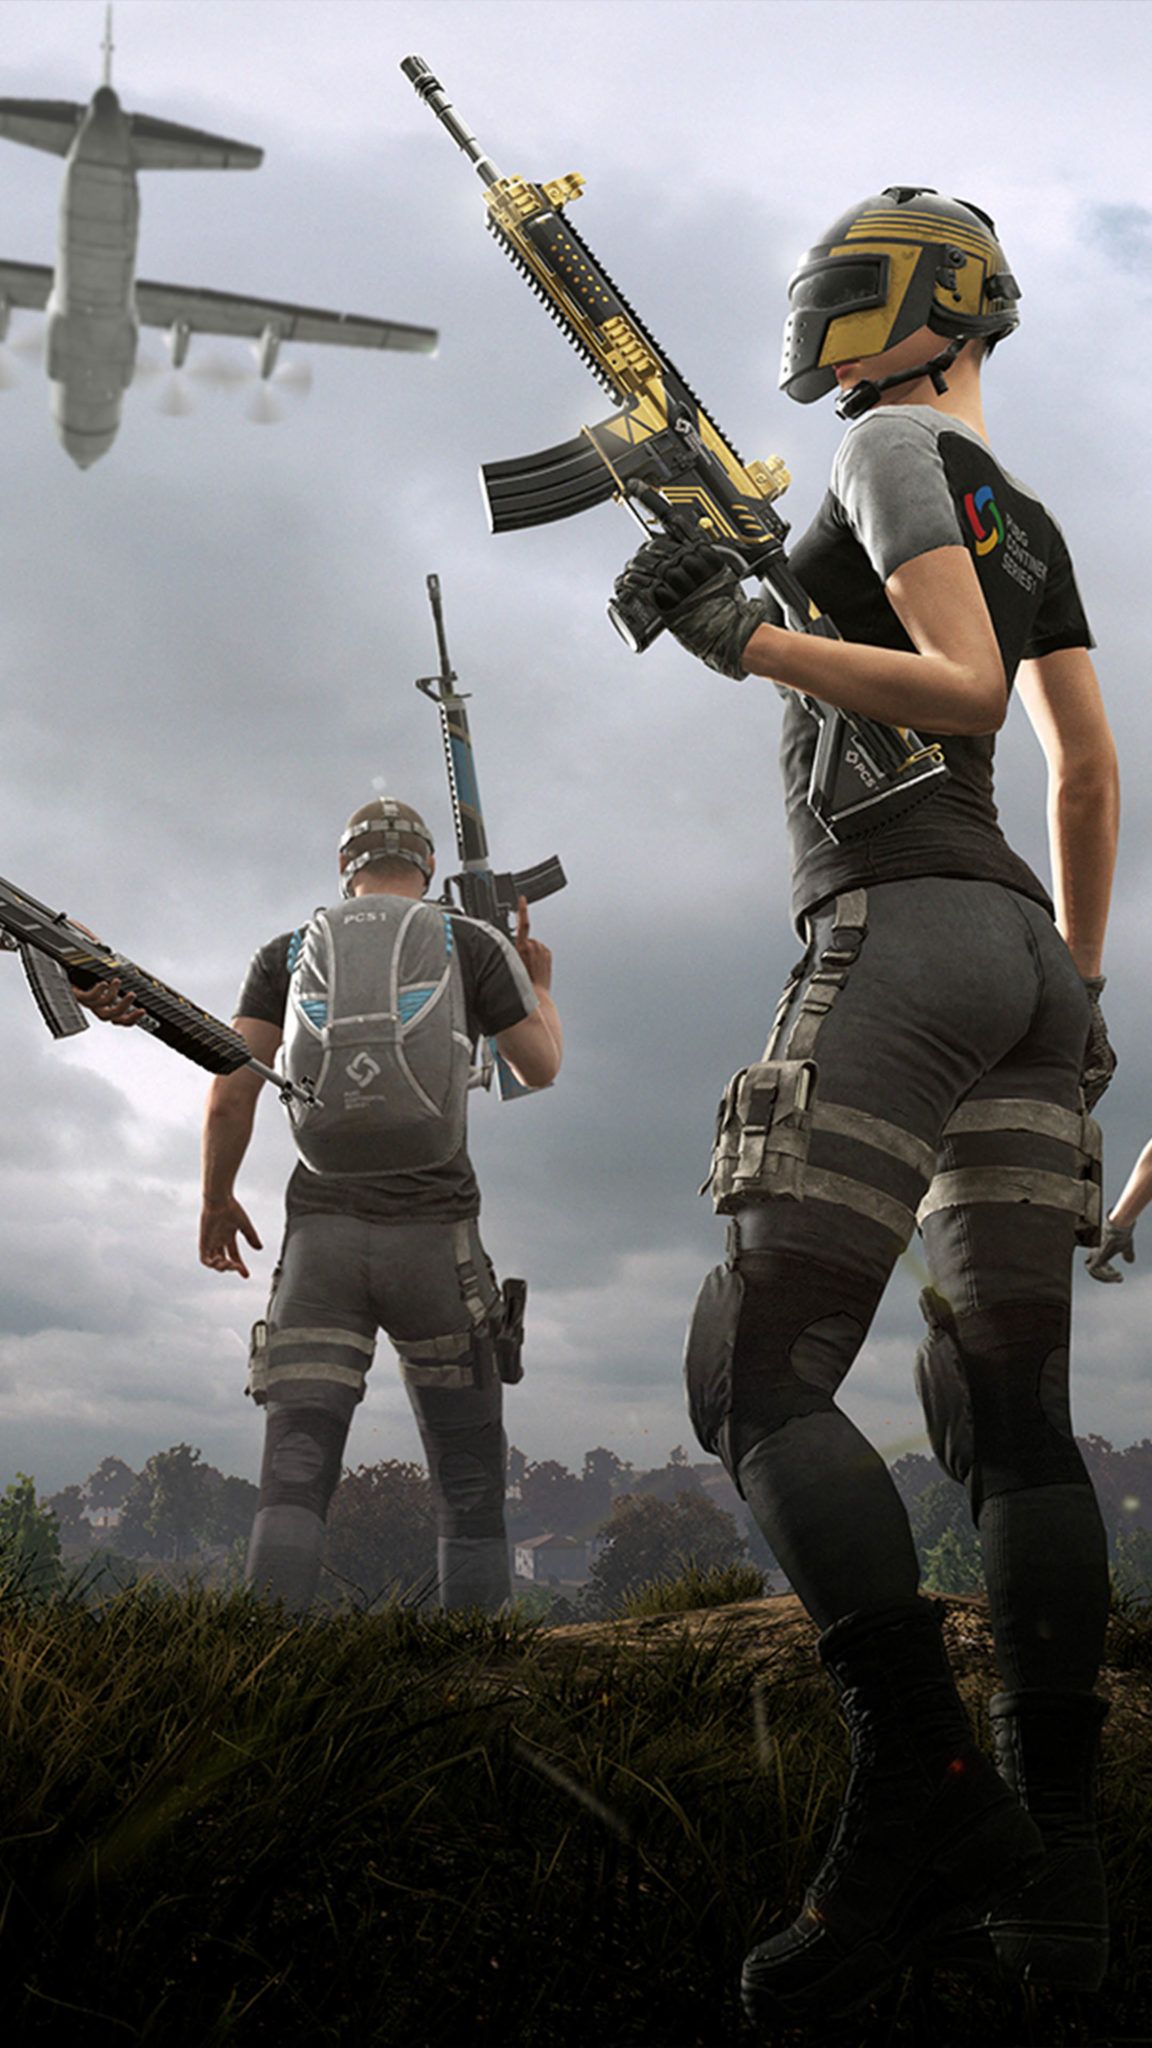 PUBG Mobile Squad 2020 Wallpapers